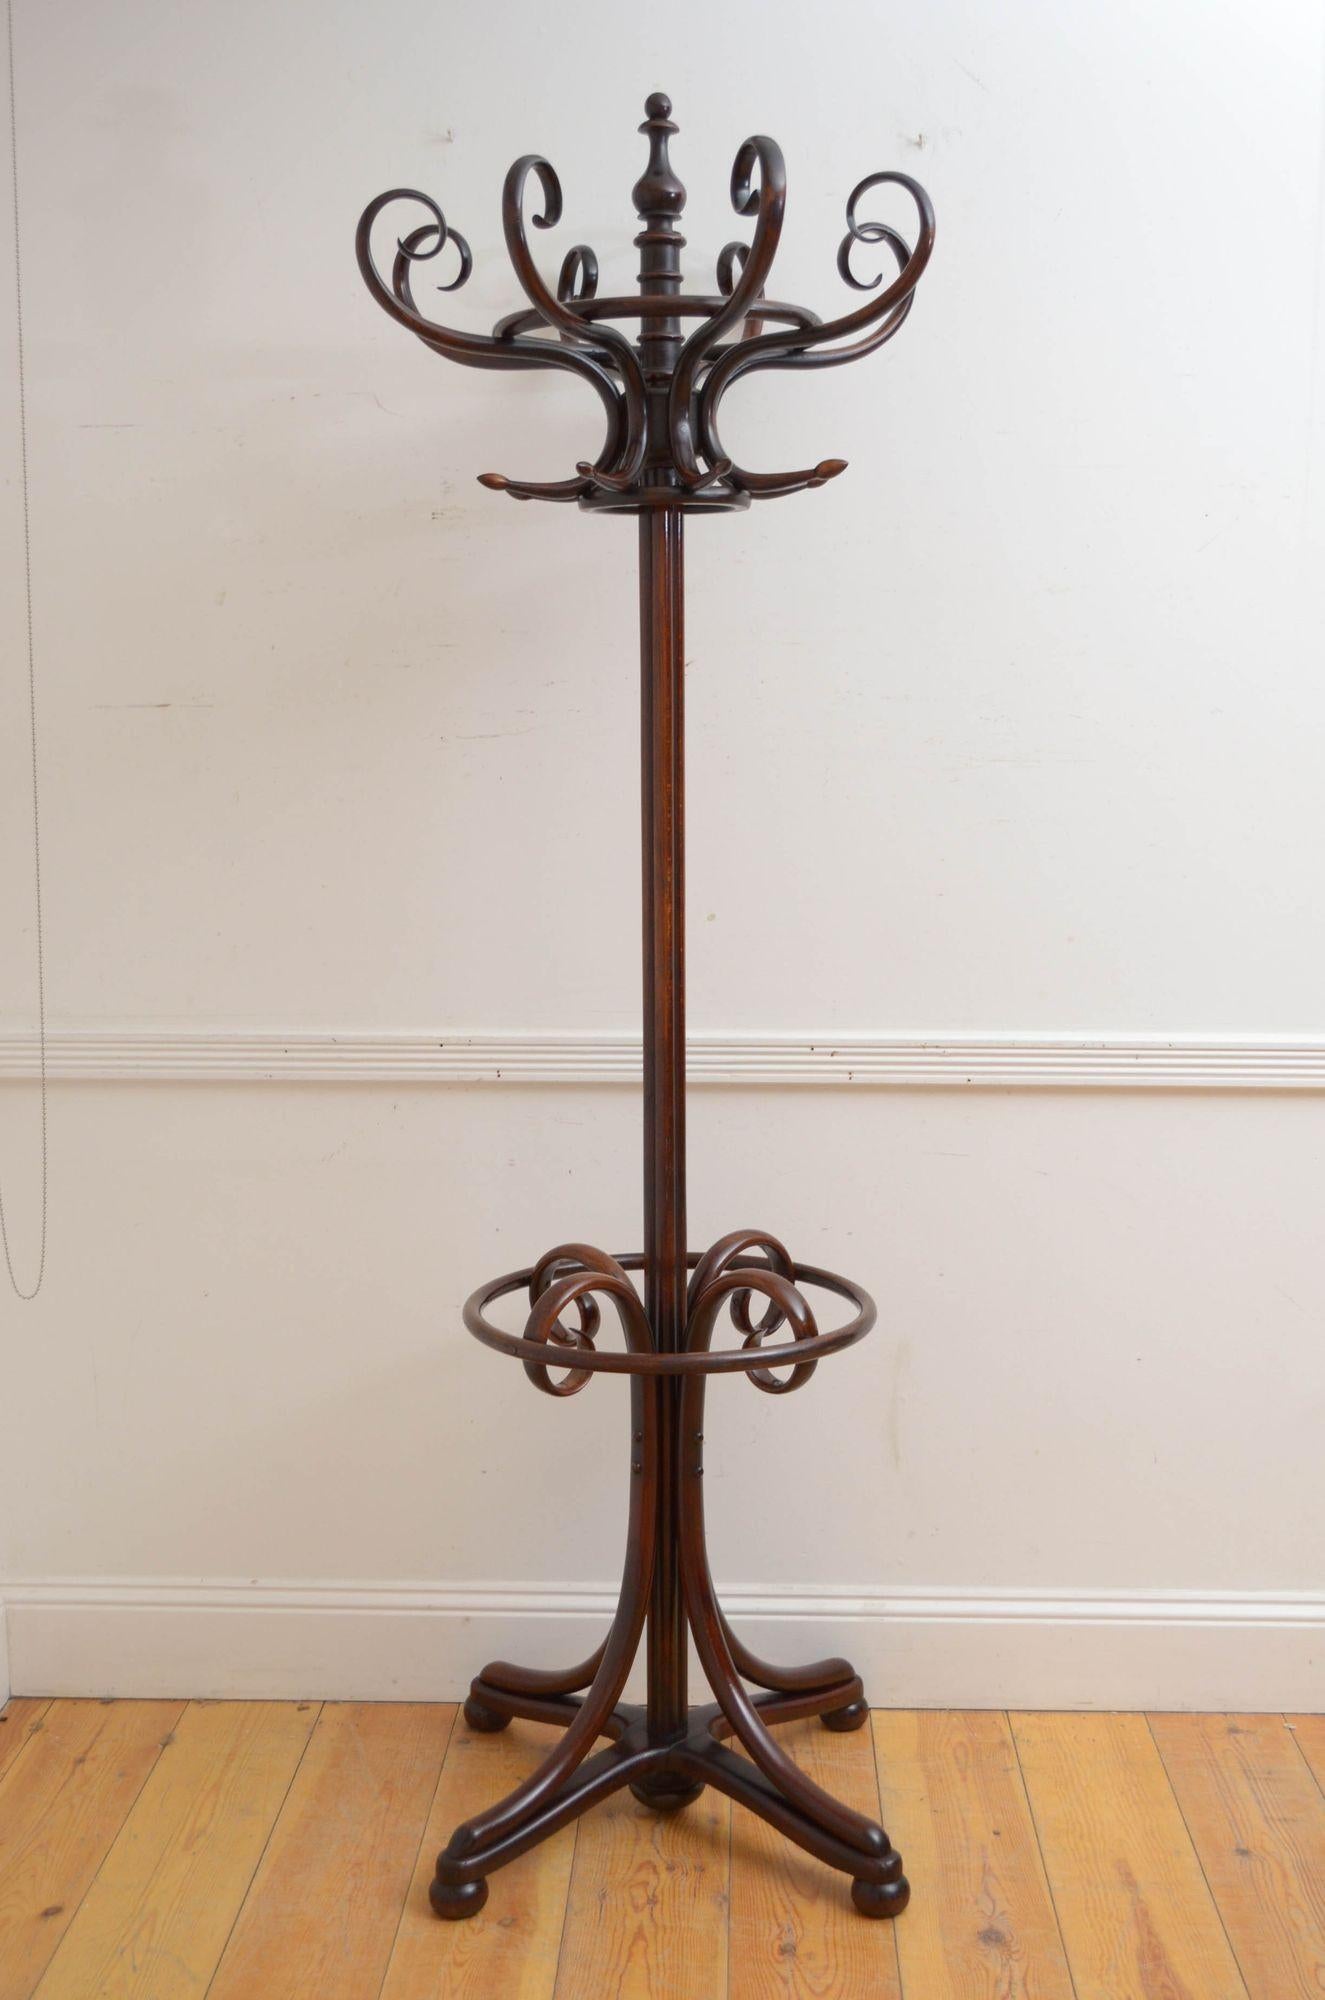 Sn5458 Elegant Thonet style bentwood hall stand, having revolving top with eight S shaped coat and hat hooks, surmounted by a turned finial, supported on cluster column terminating in four downswept legs with a ring for walking sticks and umbrellas.